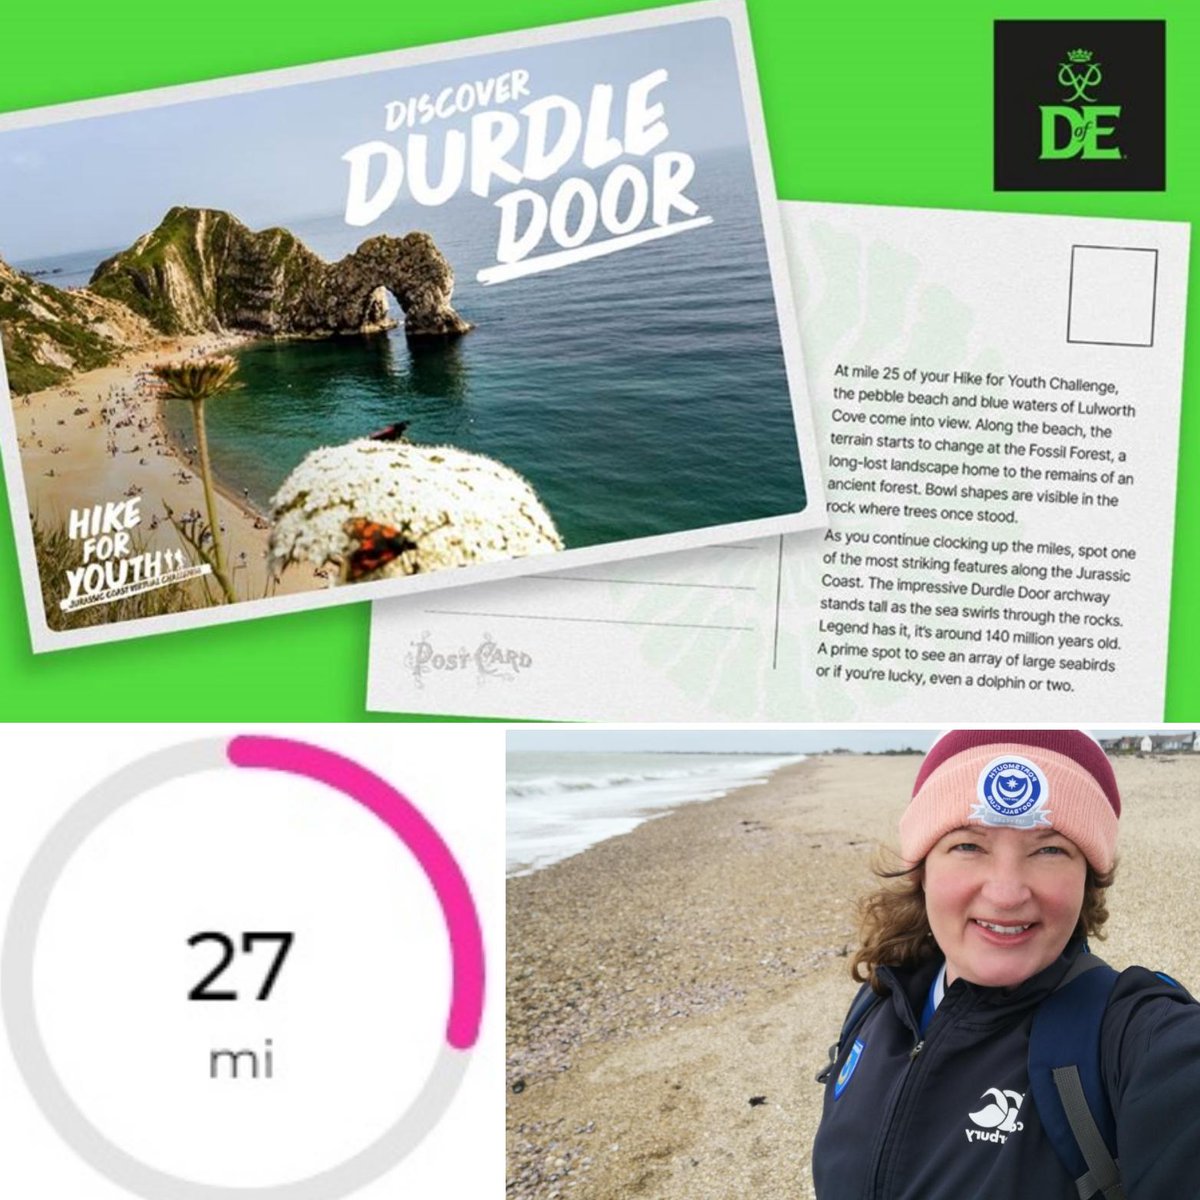 Just got my 1st postcard from my virtual challenge to #HikeForYouth #DofE📮😊🎉 I'm past Durdle Door having completed 27 miles - 😁🏖 Catch up on my journey here: bit.ly/3J2kILy Thank you for your support...😘 #RunningWithoutLimits @DofE